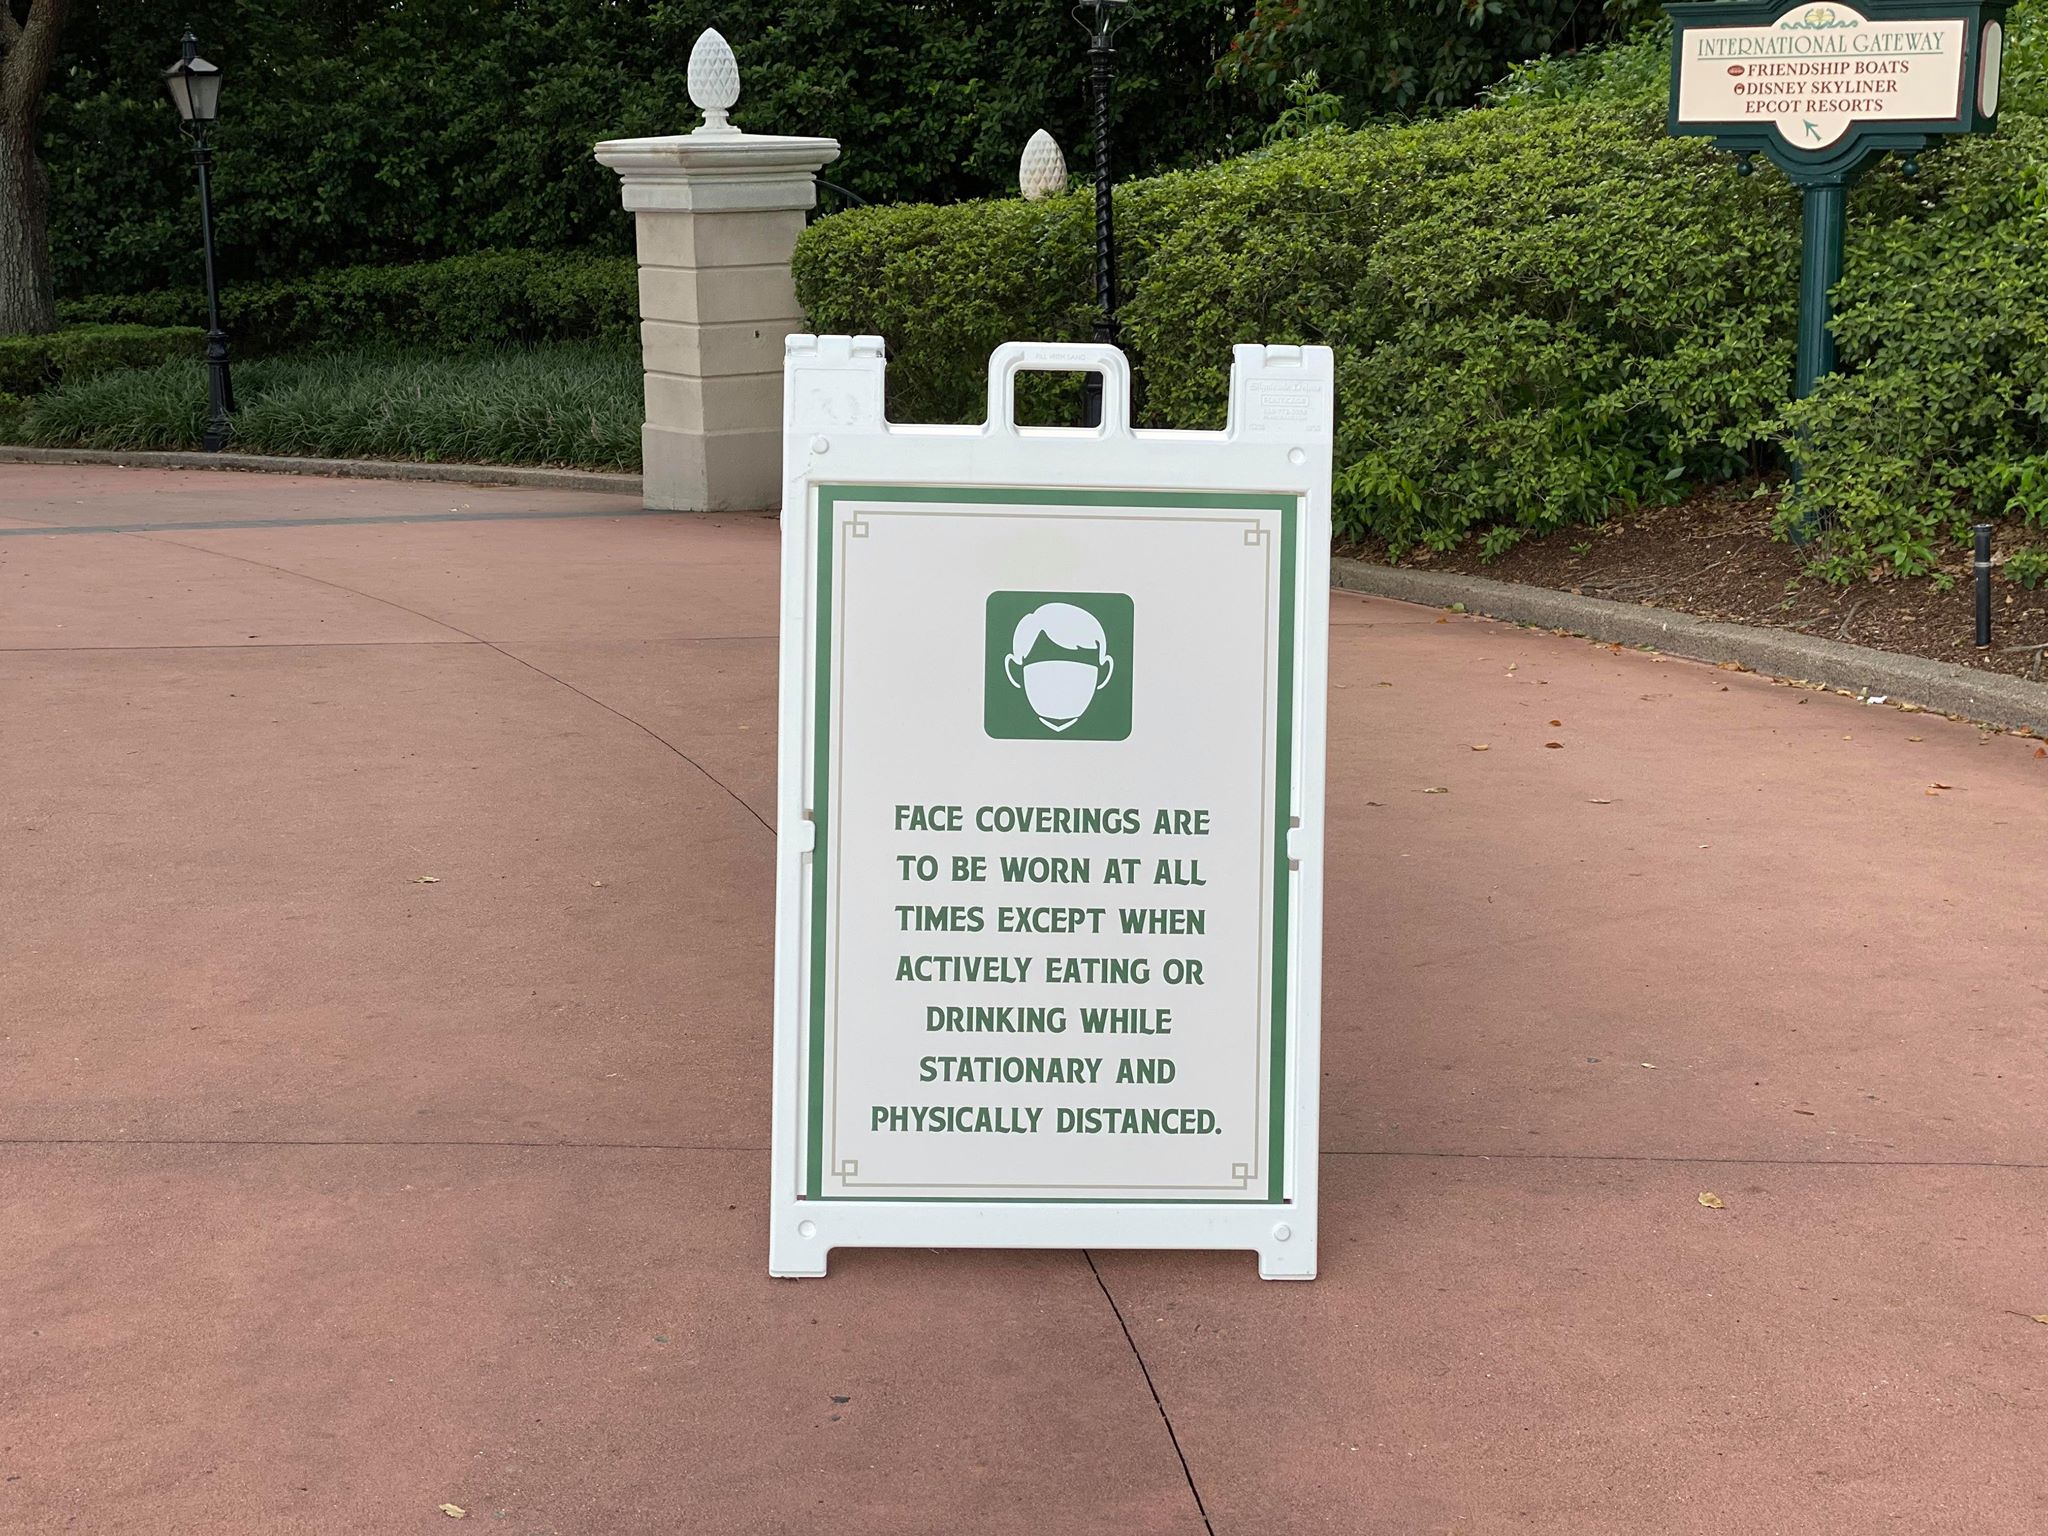 Disney World updates Mask Policy to include taking off mask to eat and drink